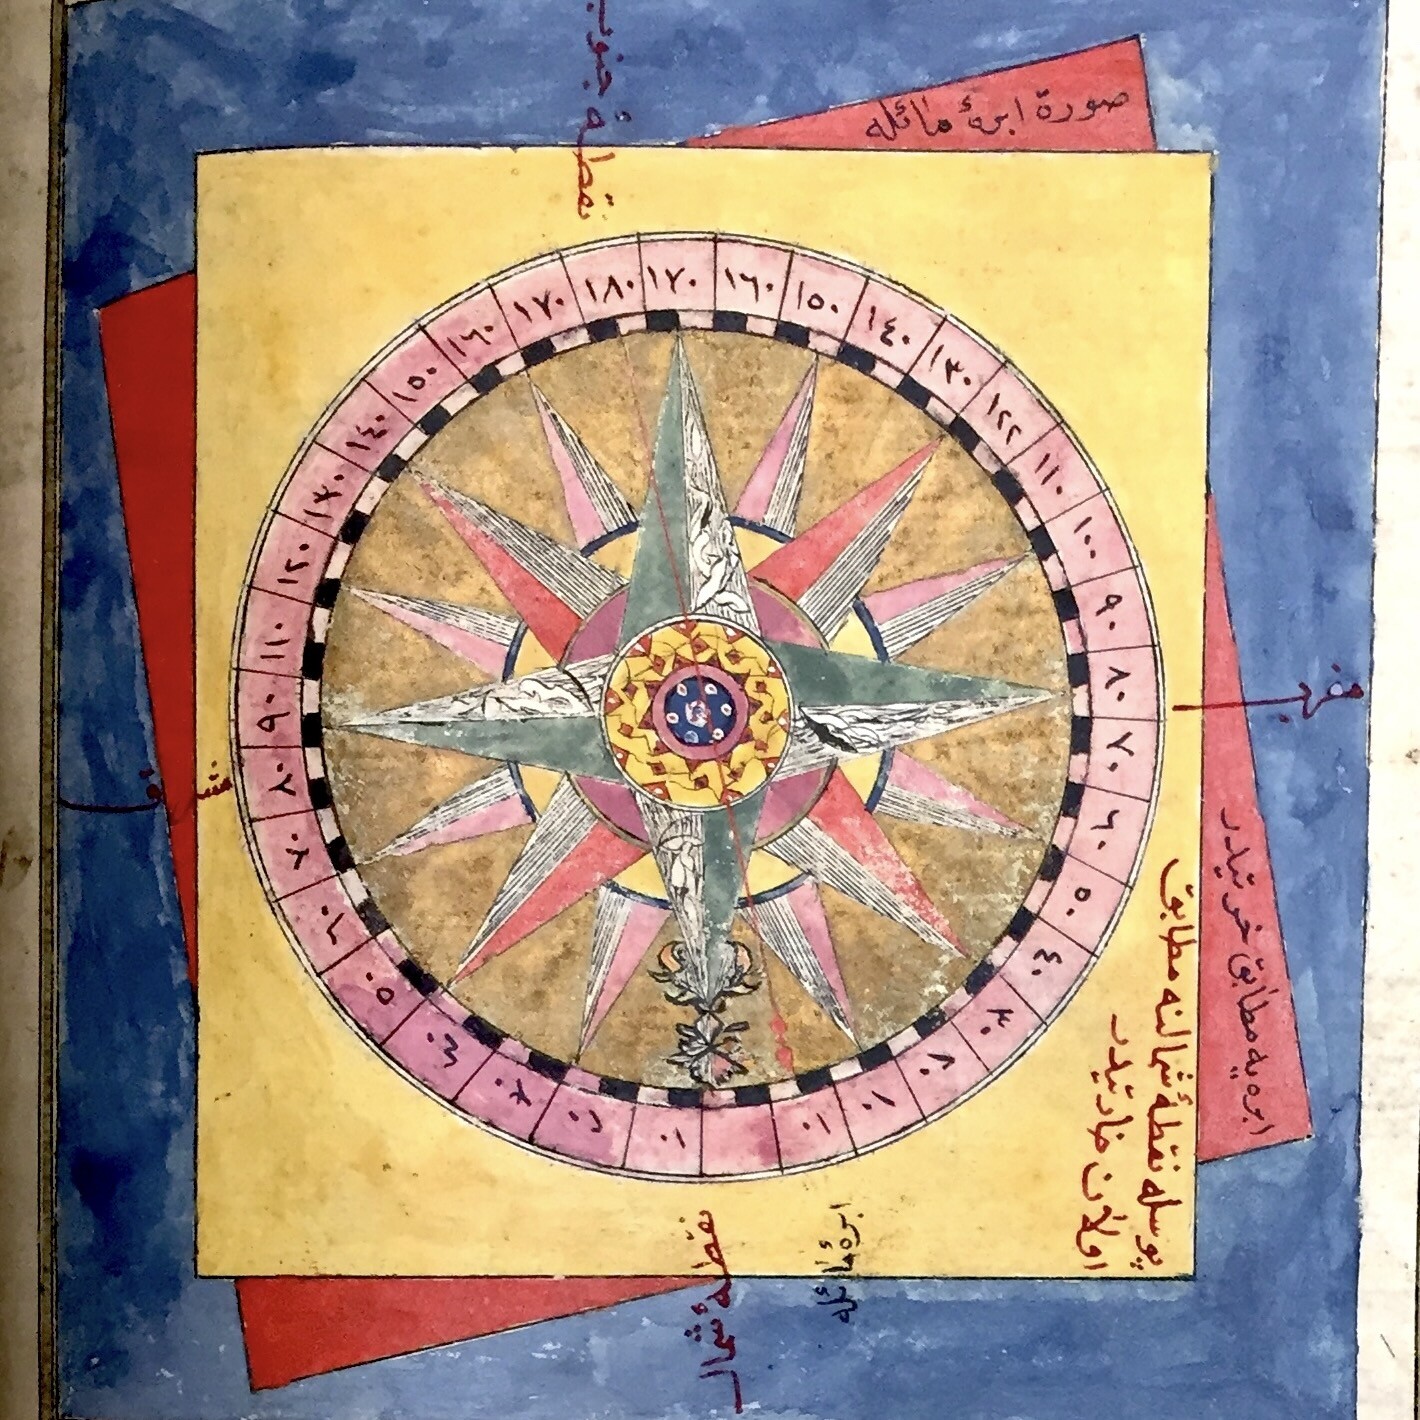 A manuscript drawing of a compass colored with yellow, red, blue and green pigment. 